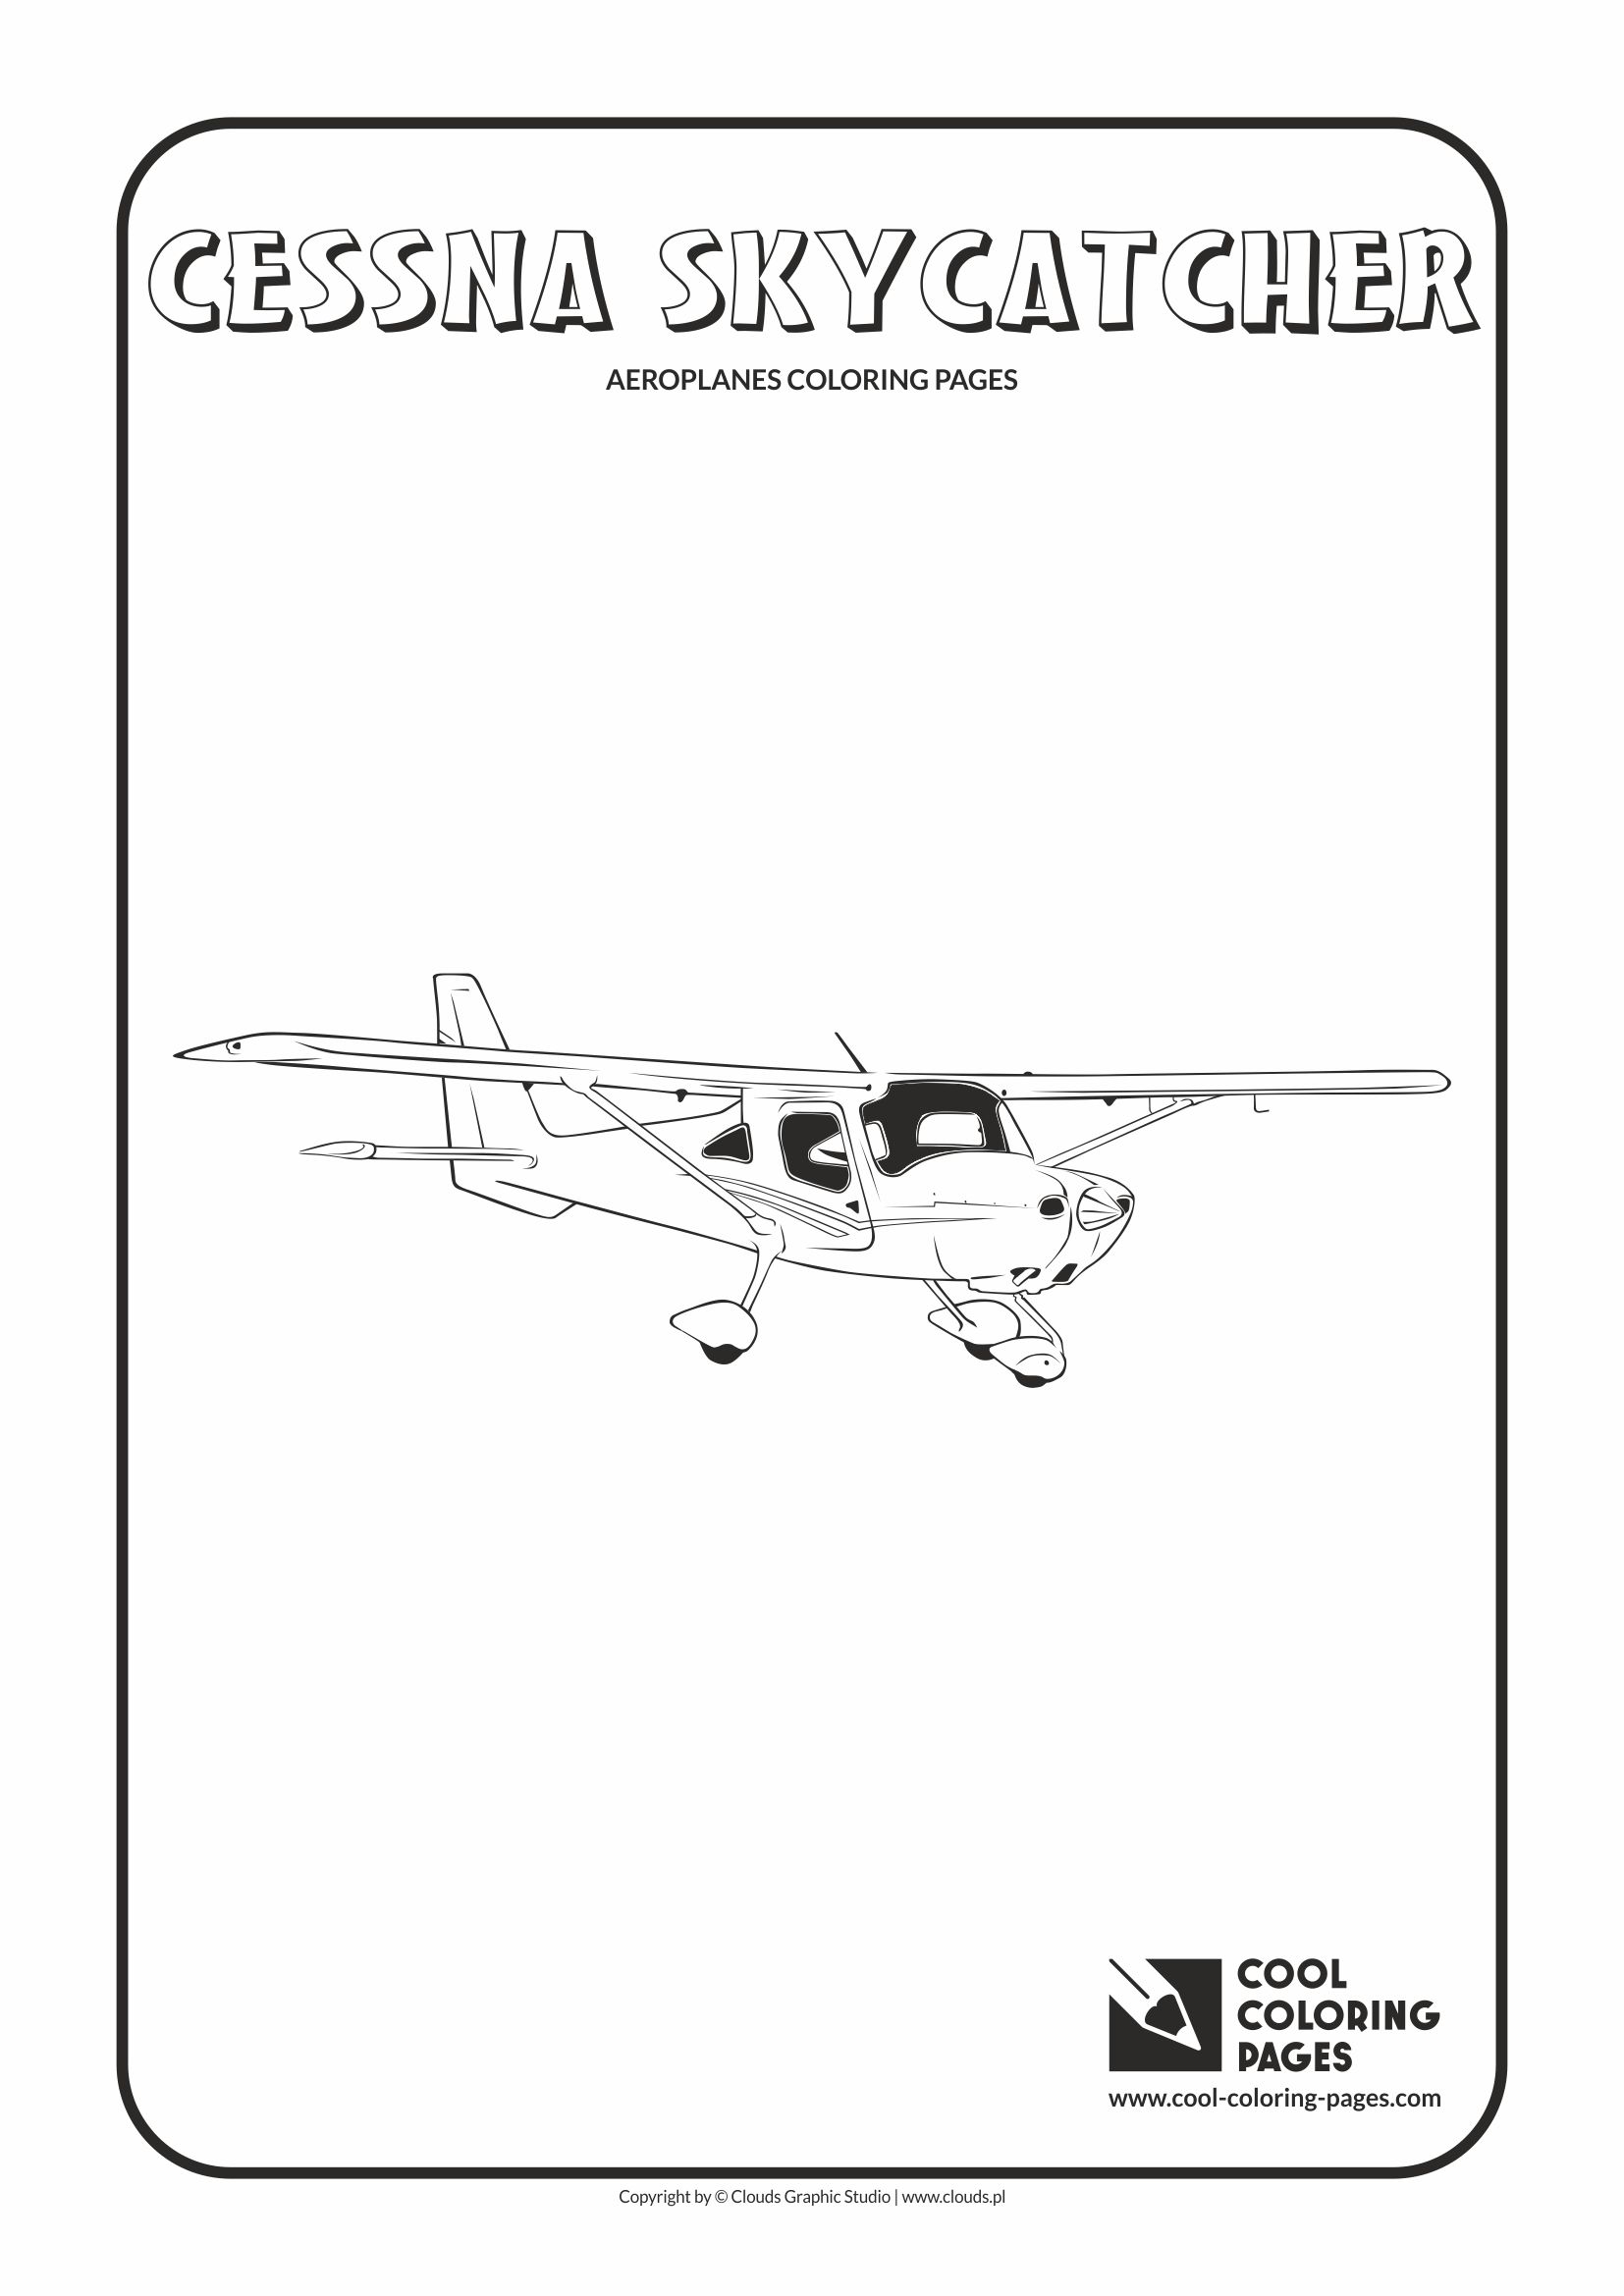 Cool Coloring Pages - Vehicles / Cessna Skycatcher / Coloring page with Cessna Skycatcher